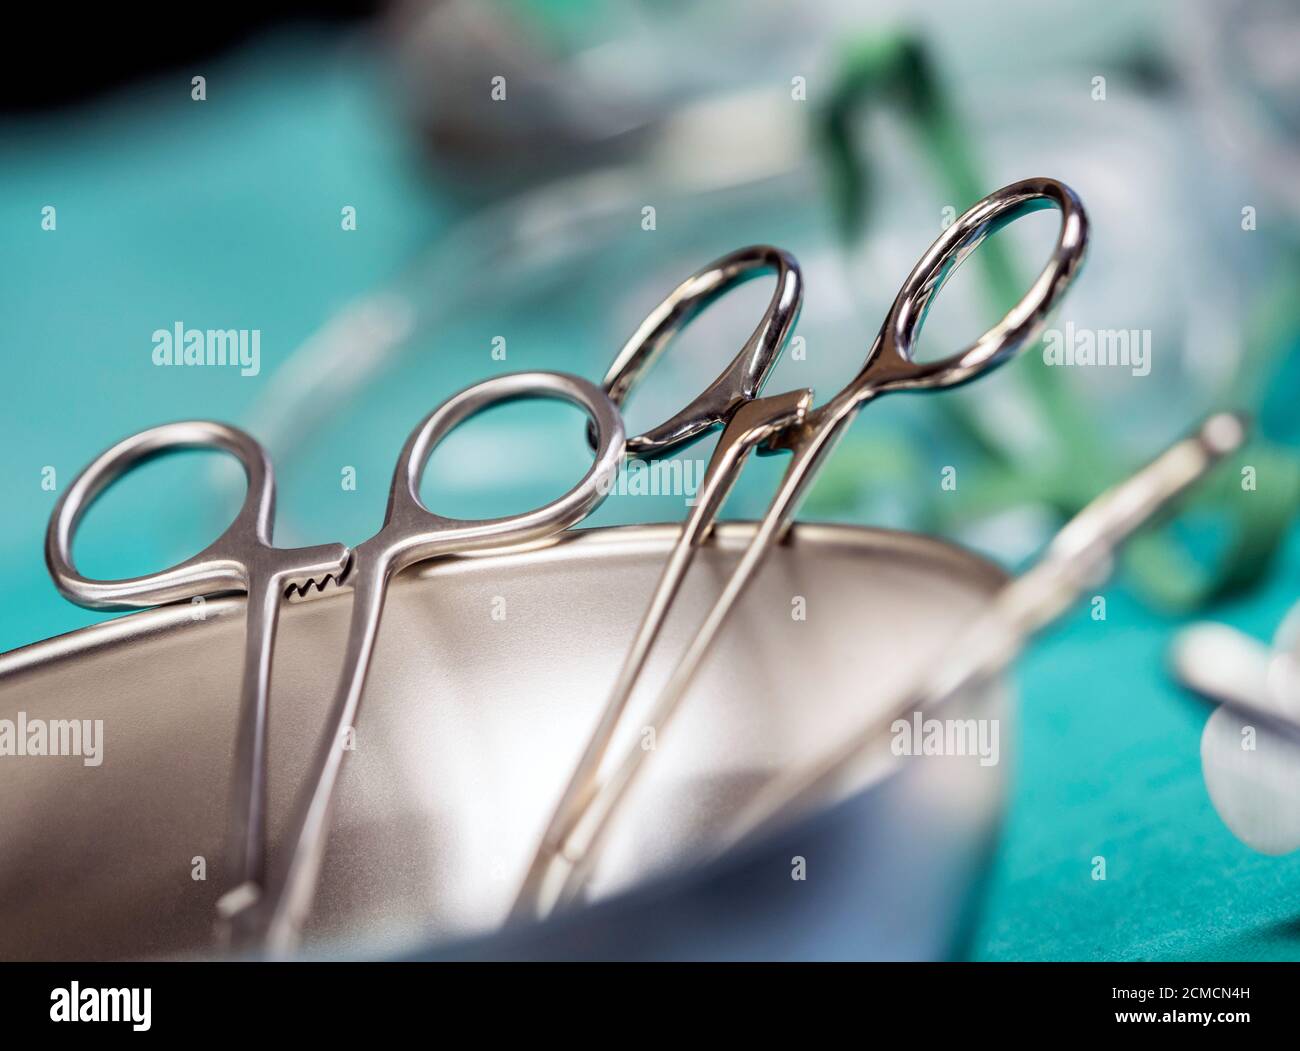 Some scissors for surgery on a tray, conceptual image Stock Photo